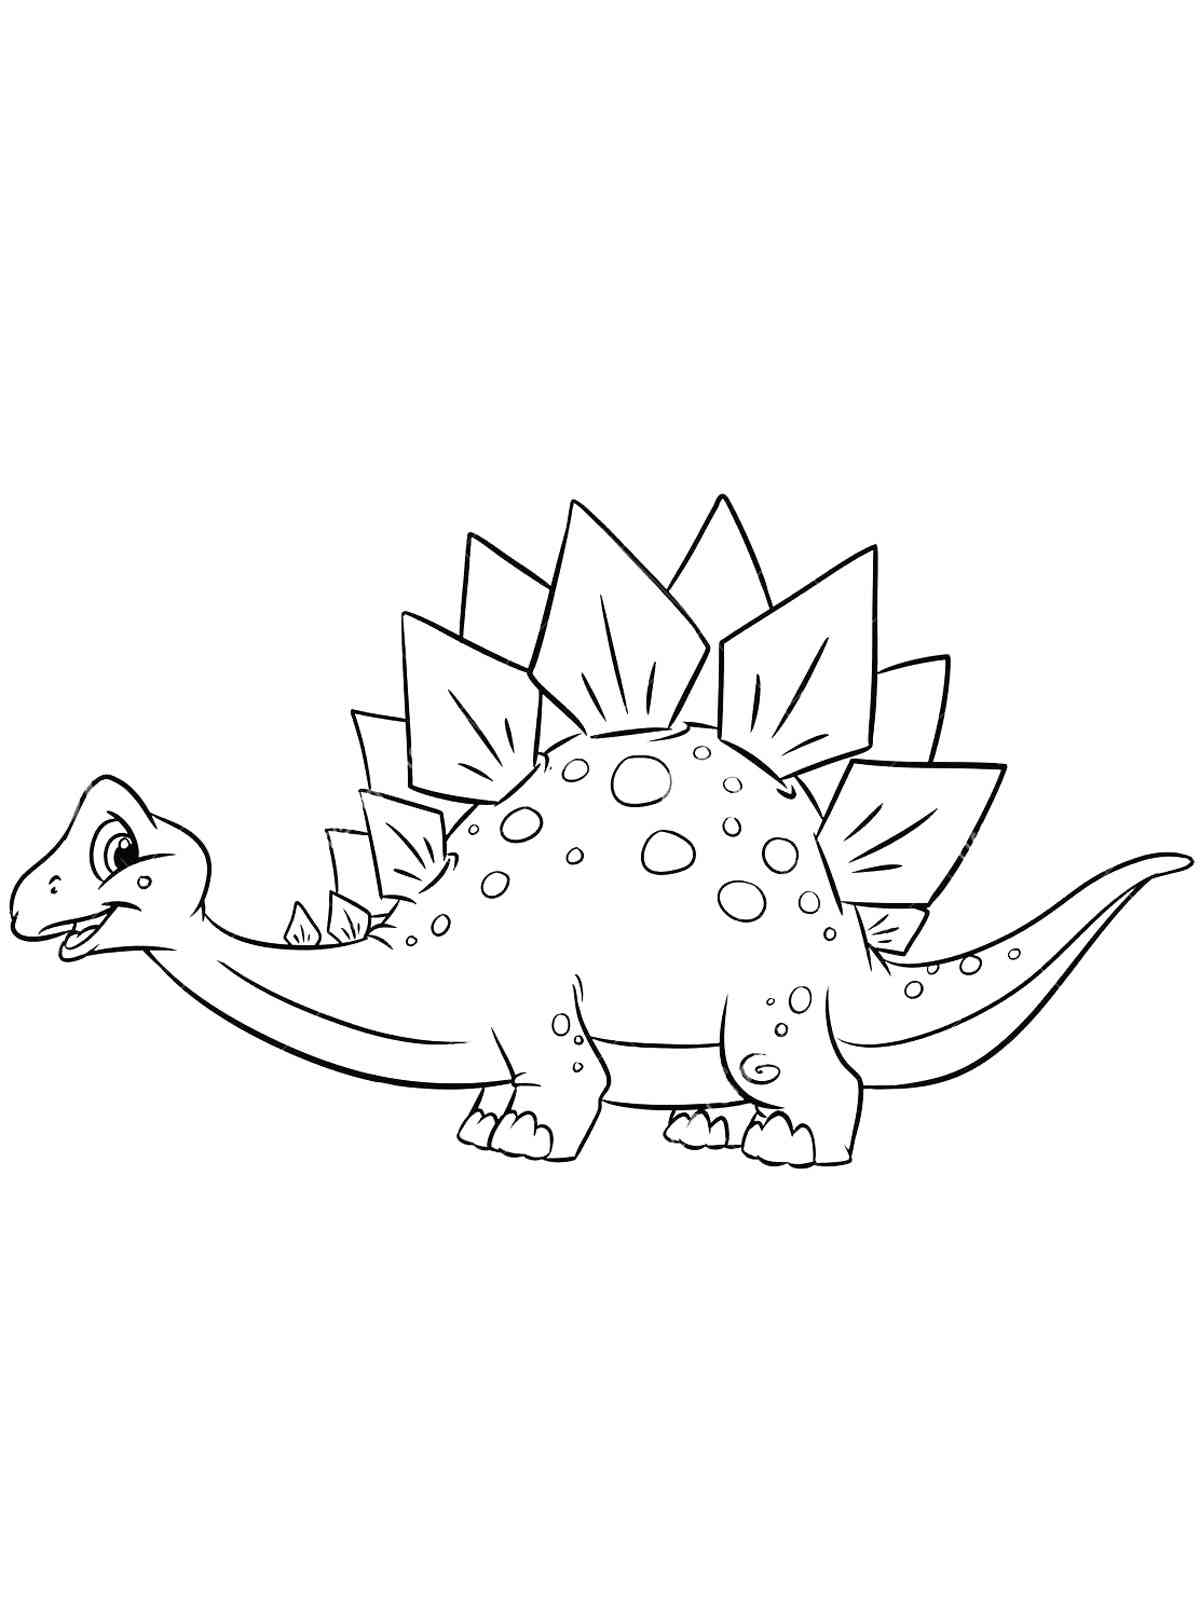 Stegosaurus coloring pages